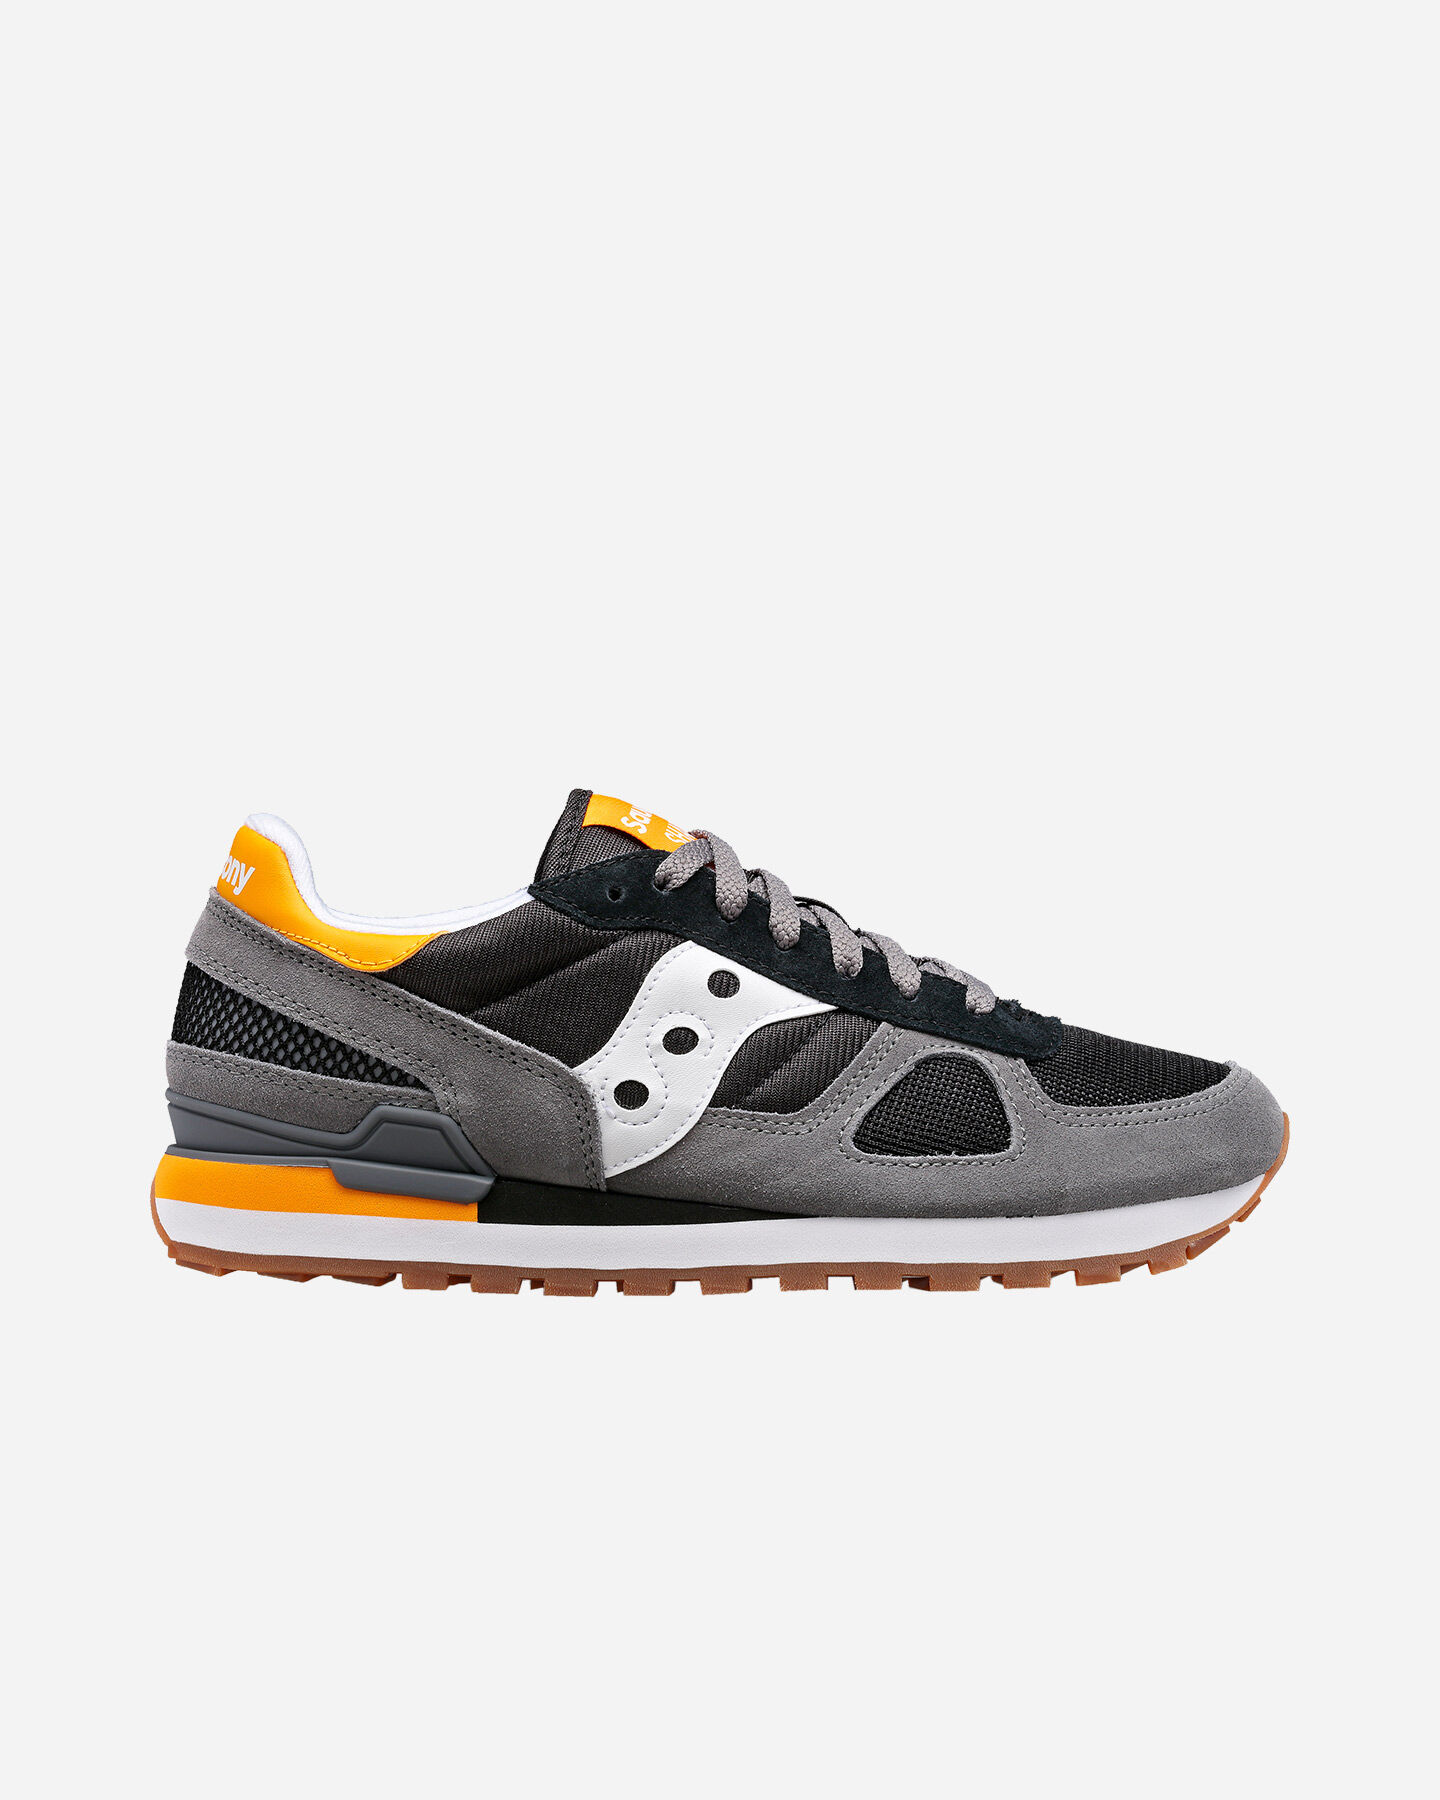  Scarpe sneakers SAUCONY SHADOW O M S5249723 scatto 0